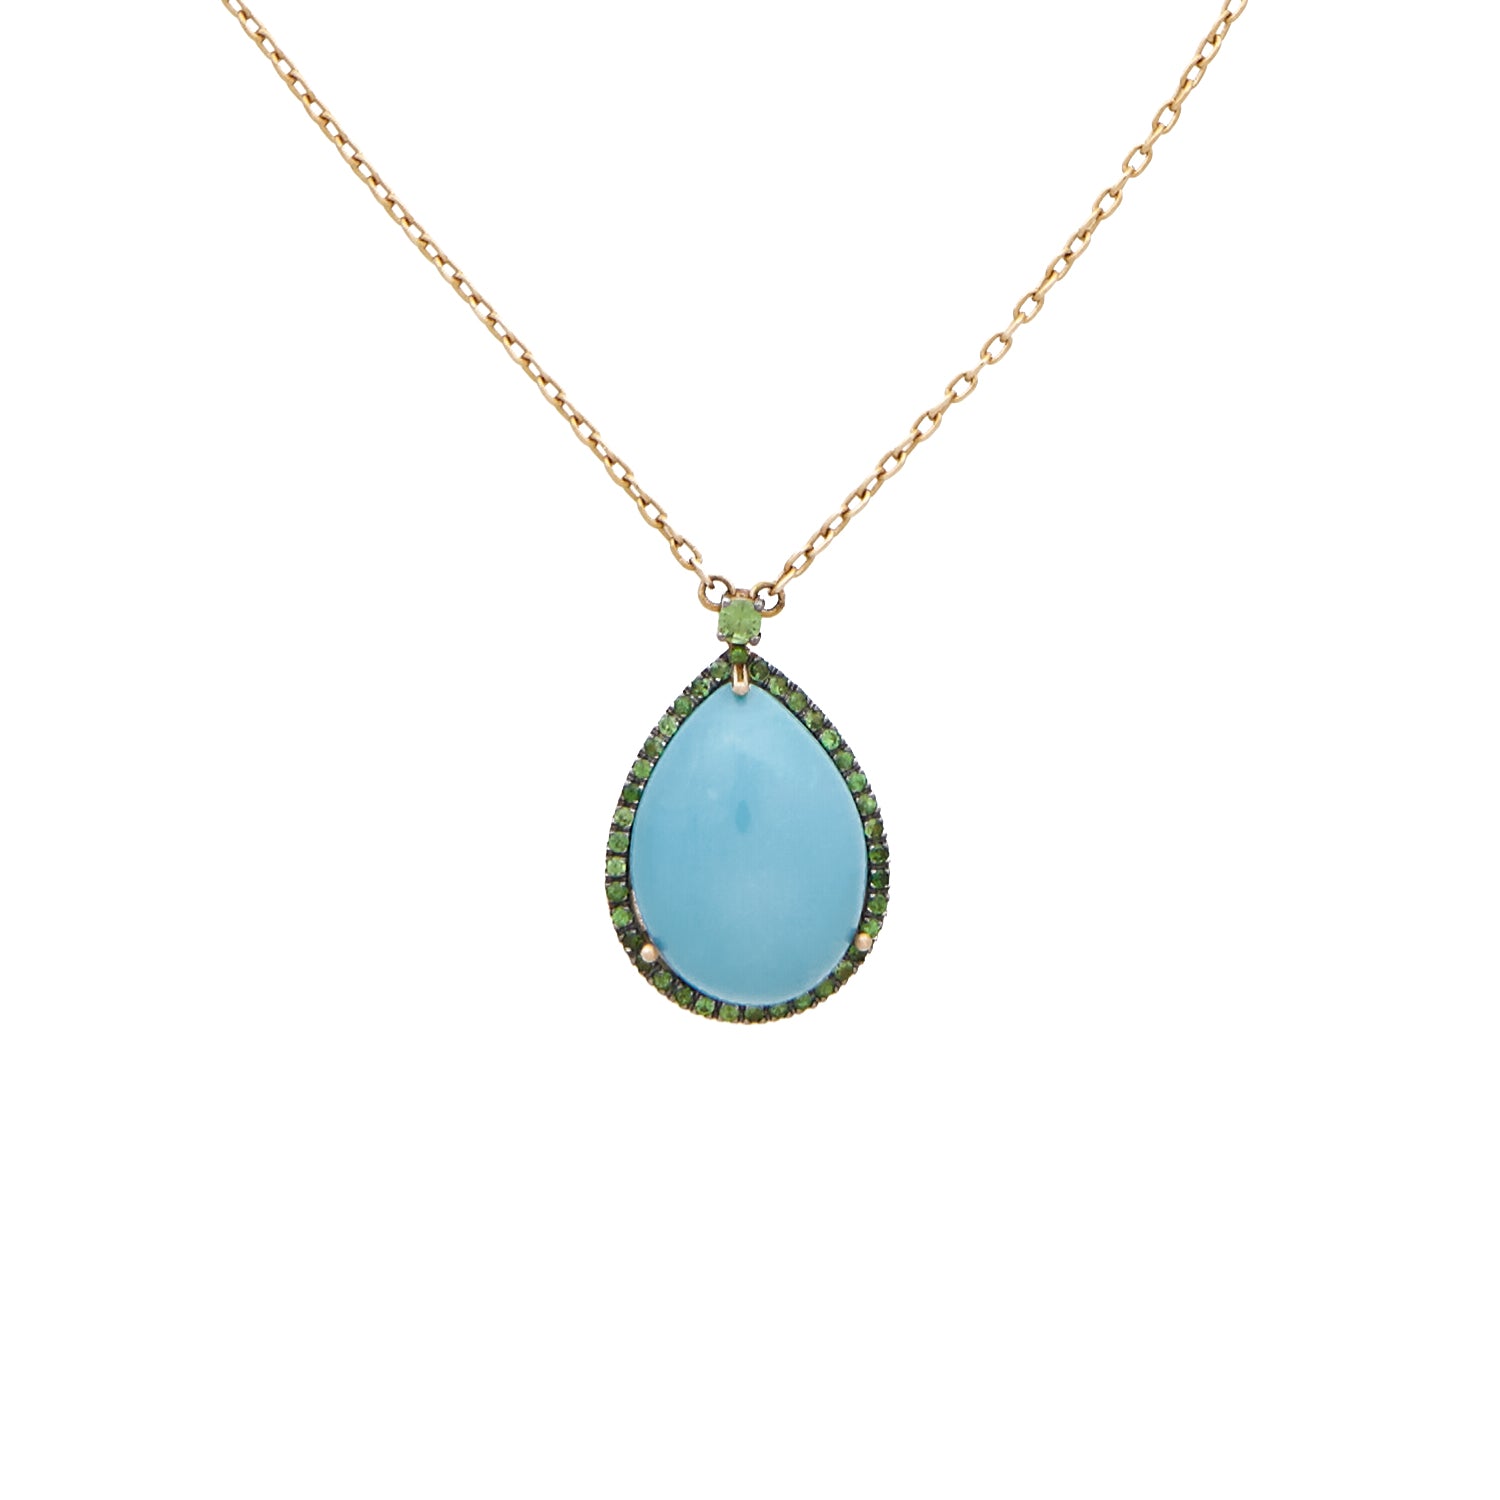 ROSE GOLD NECKLACE Turquoise and tsavorite